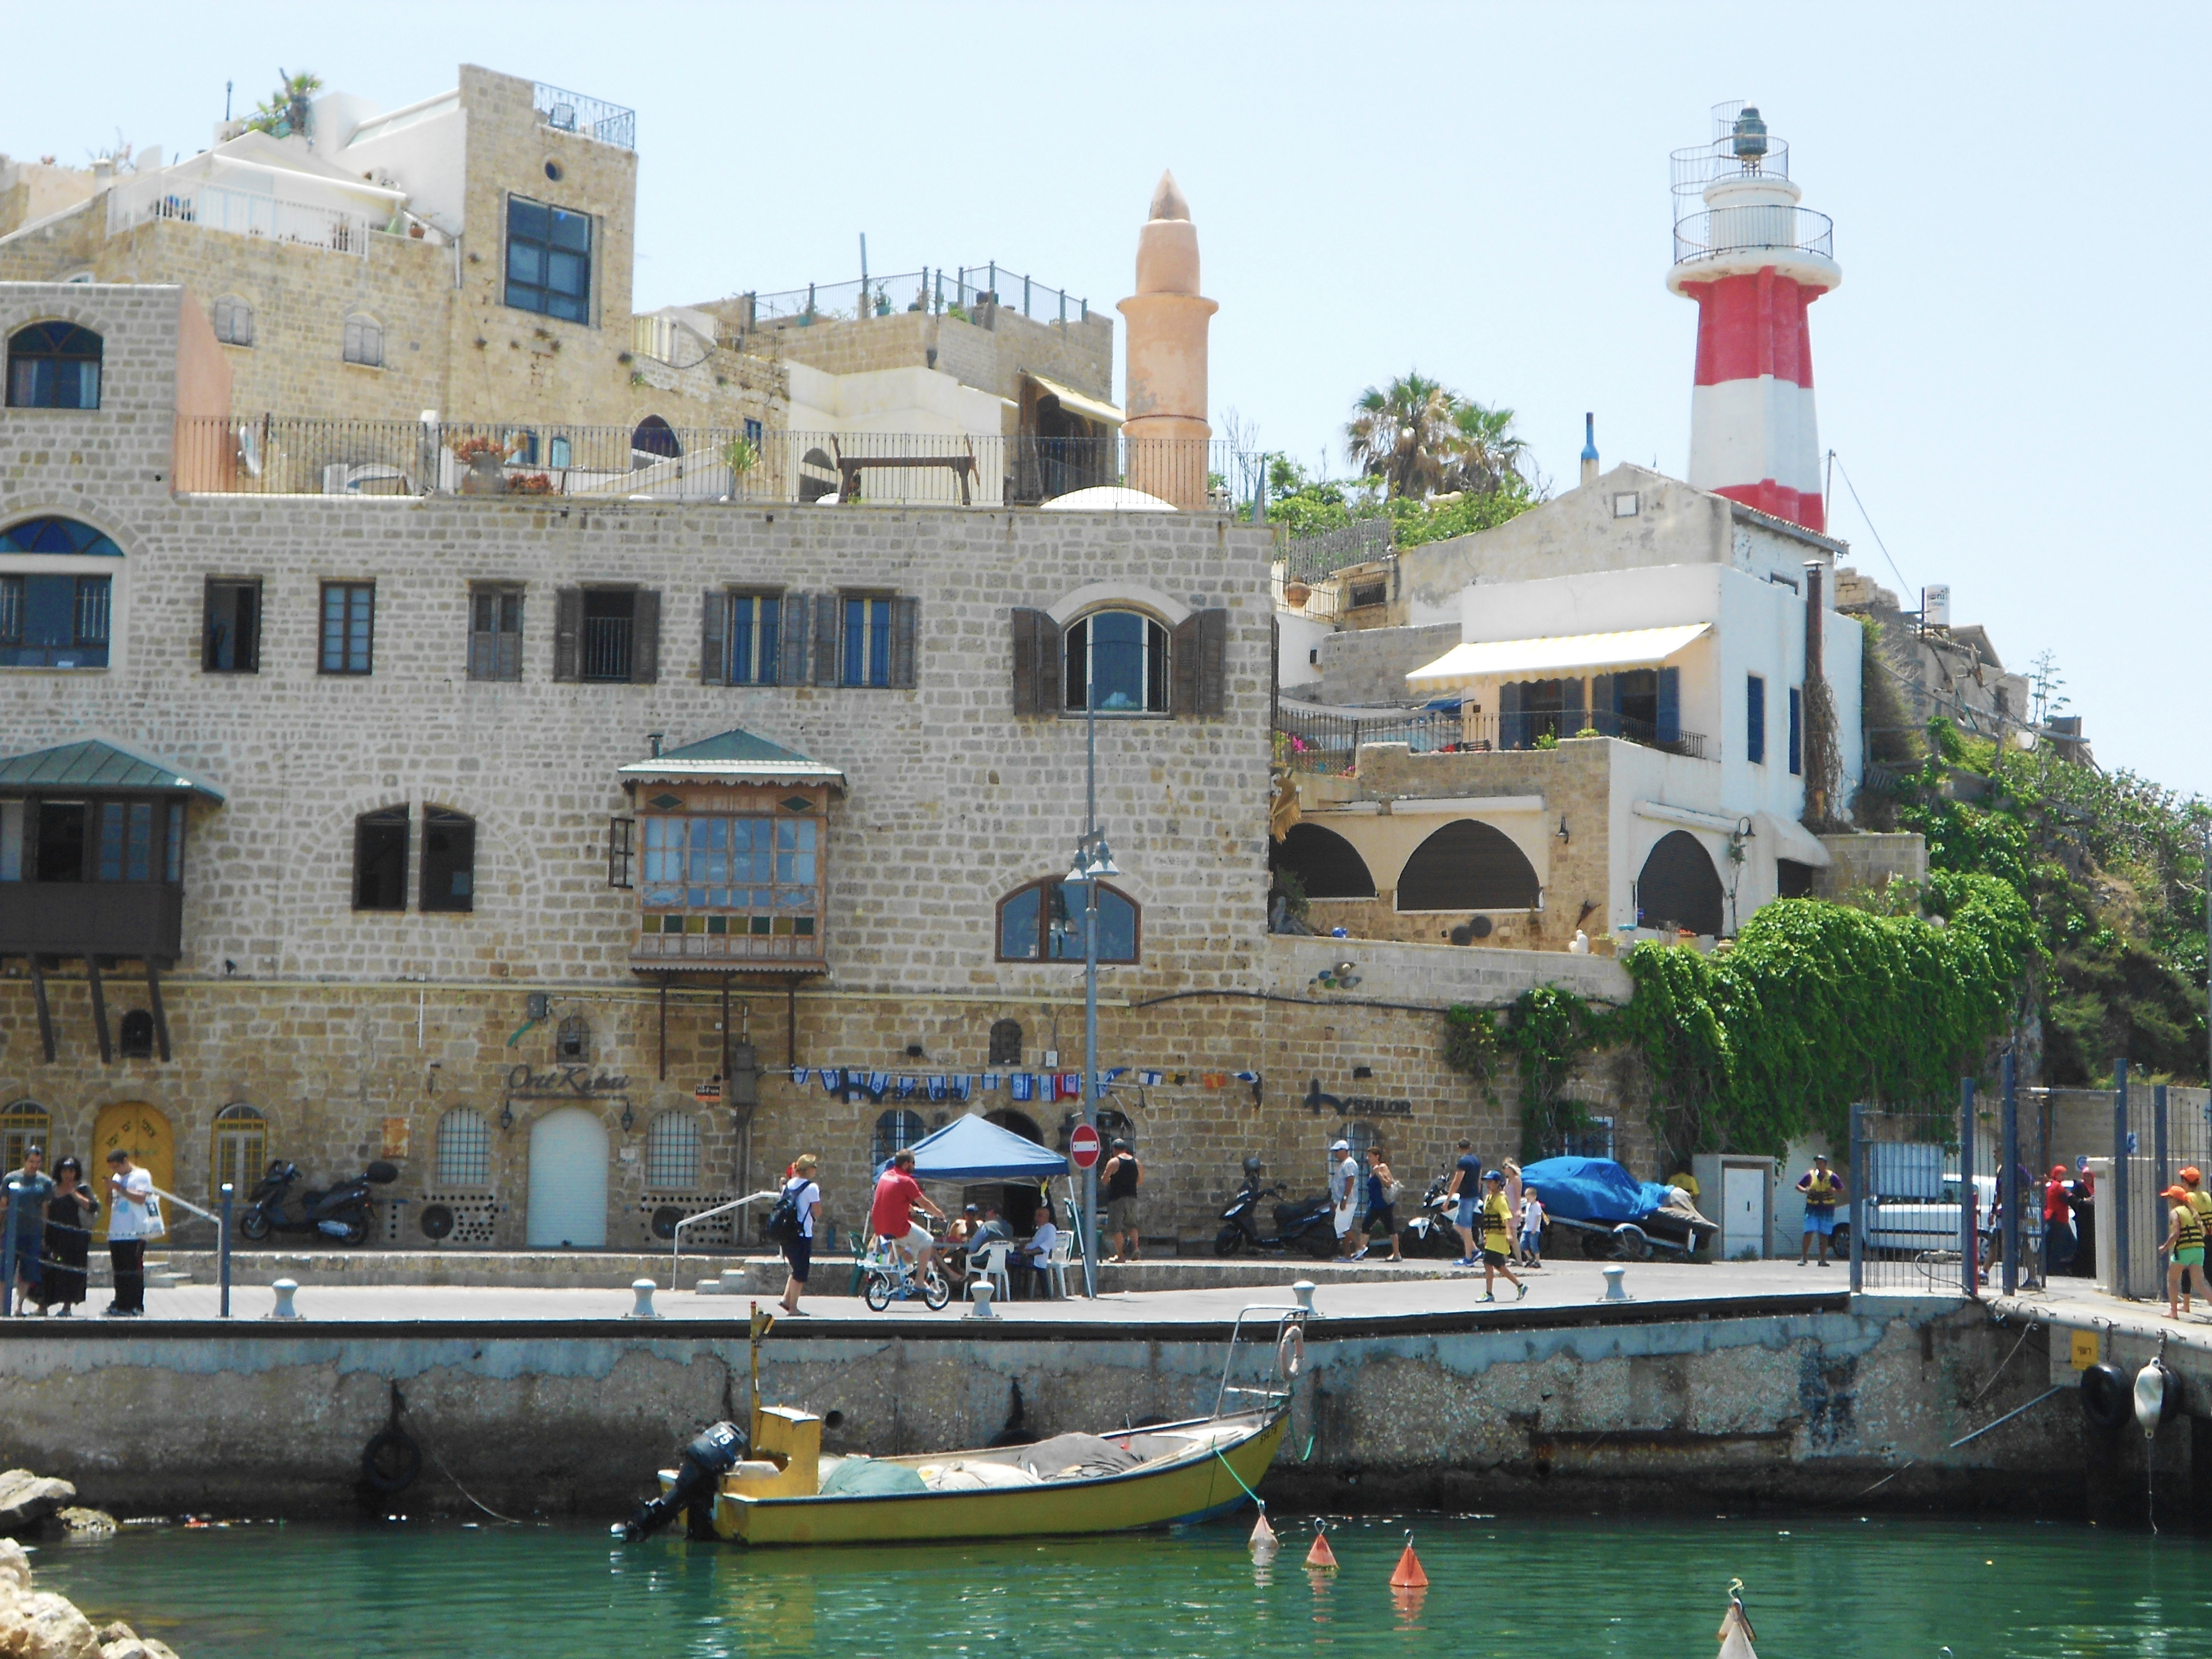 Places to stay: Tel Aviv and Jaffa, Israel